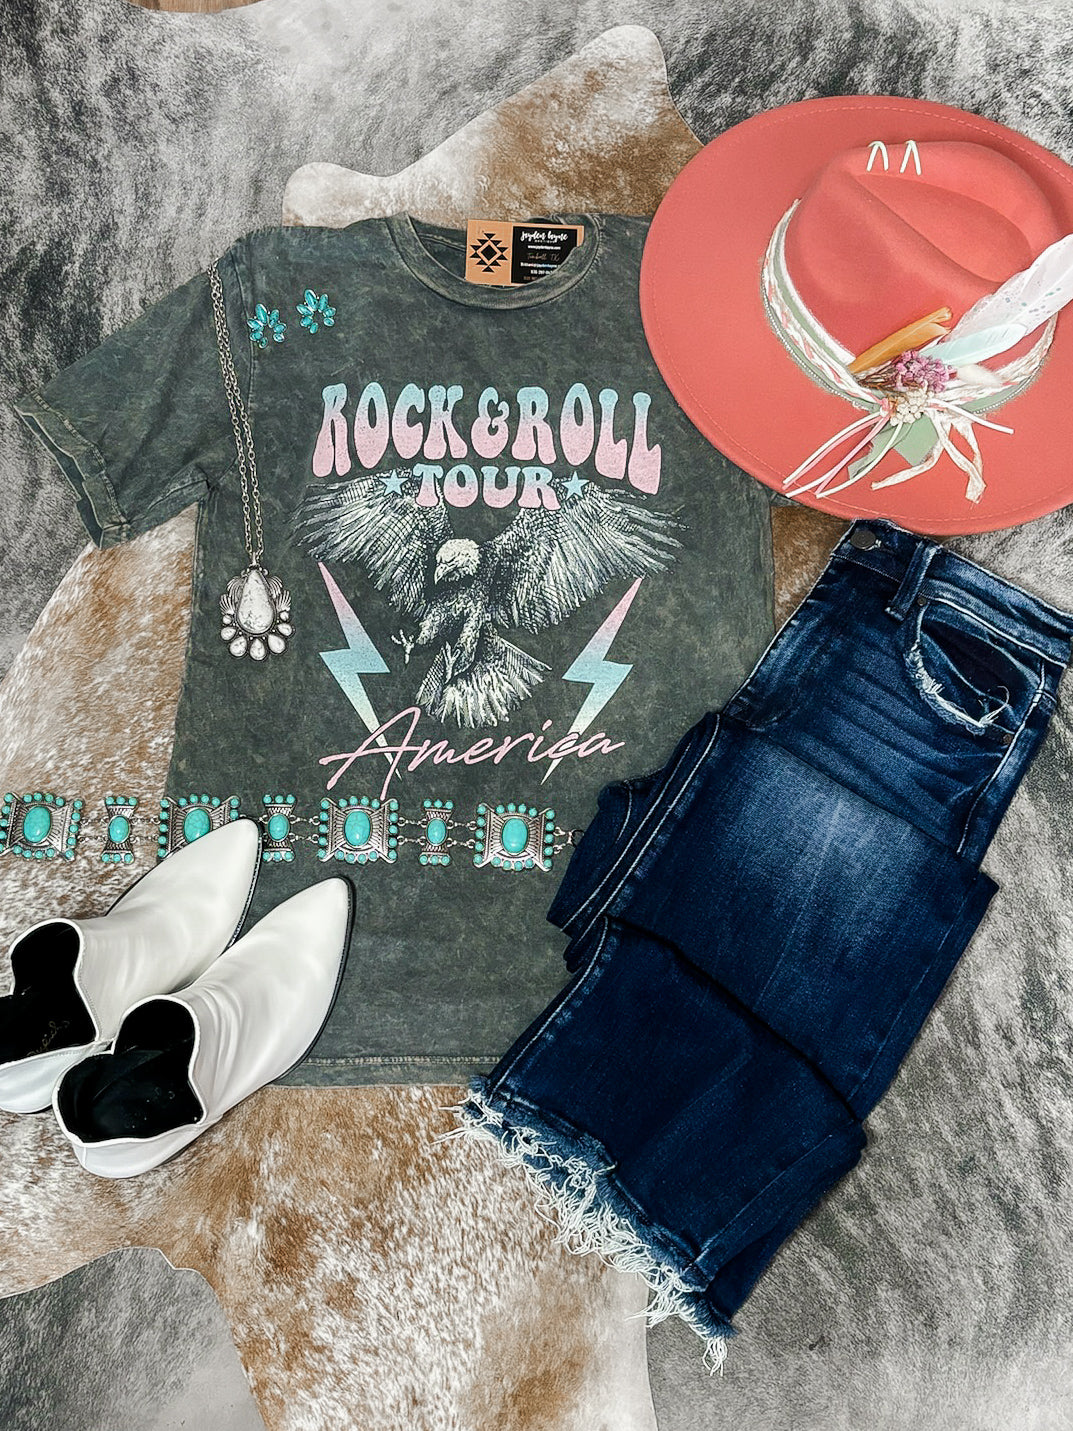 American Rock & Roll Tour Mineral Stone Tee